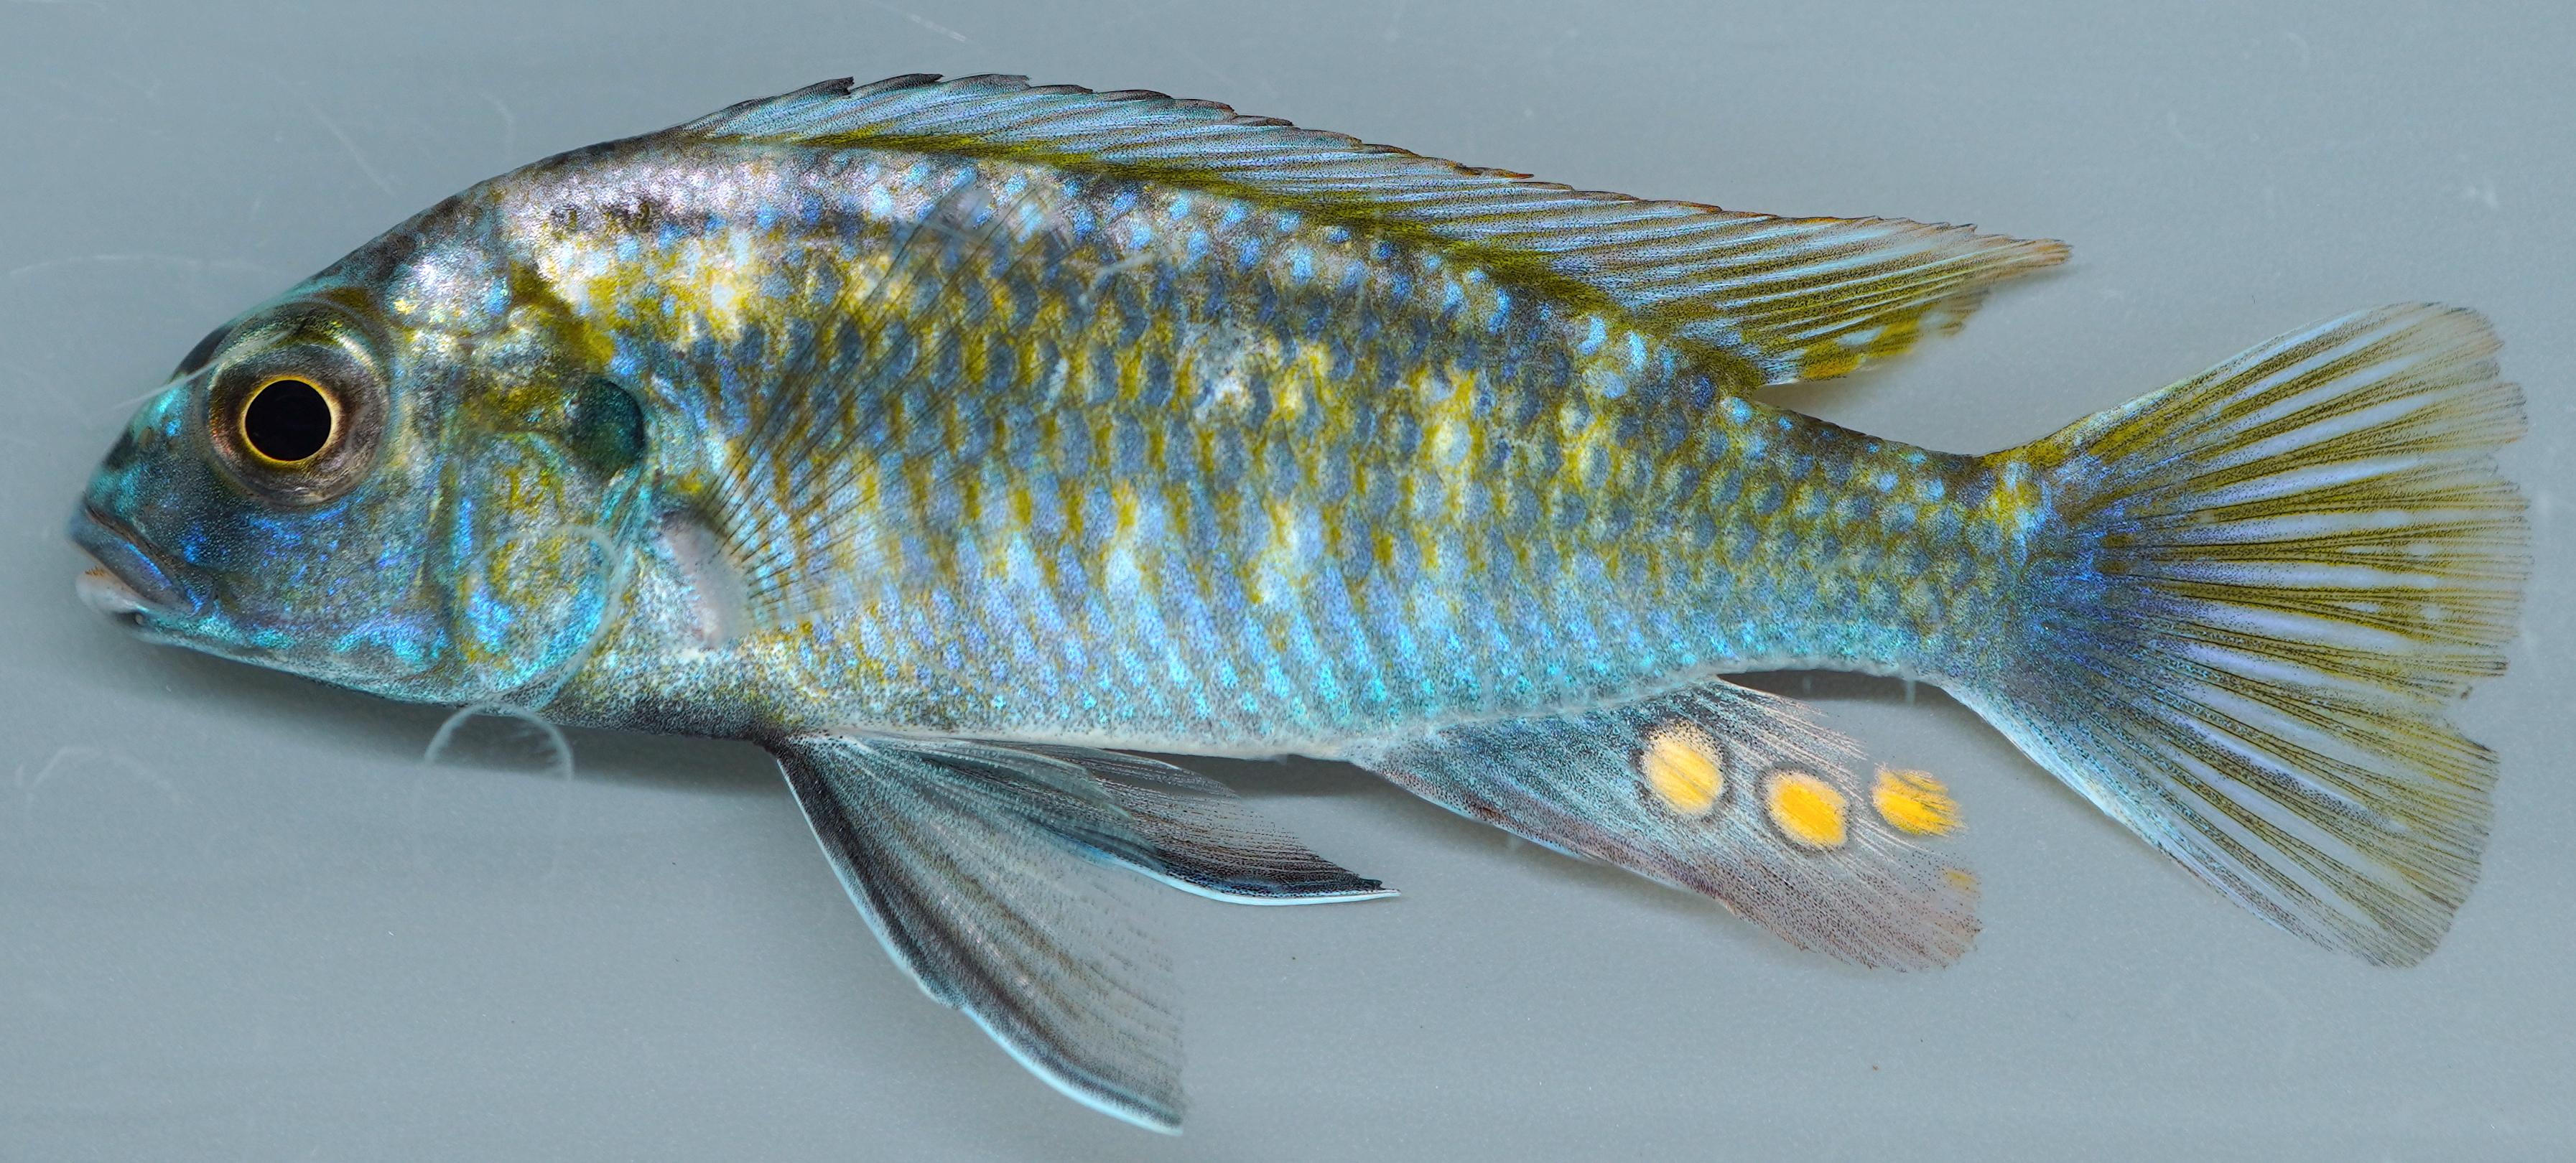 blue iridescent colouration in Malawi cichlid fishes